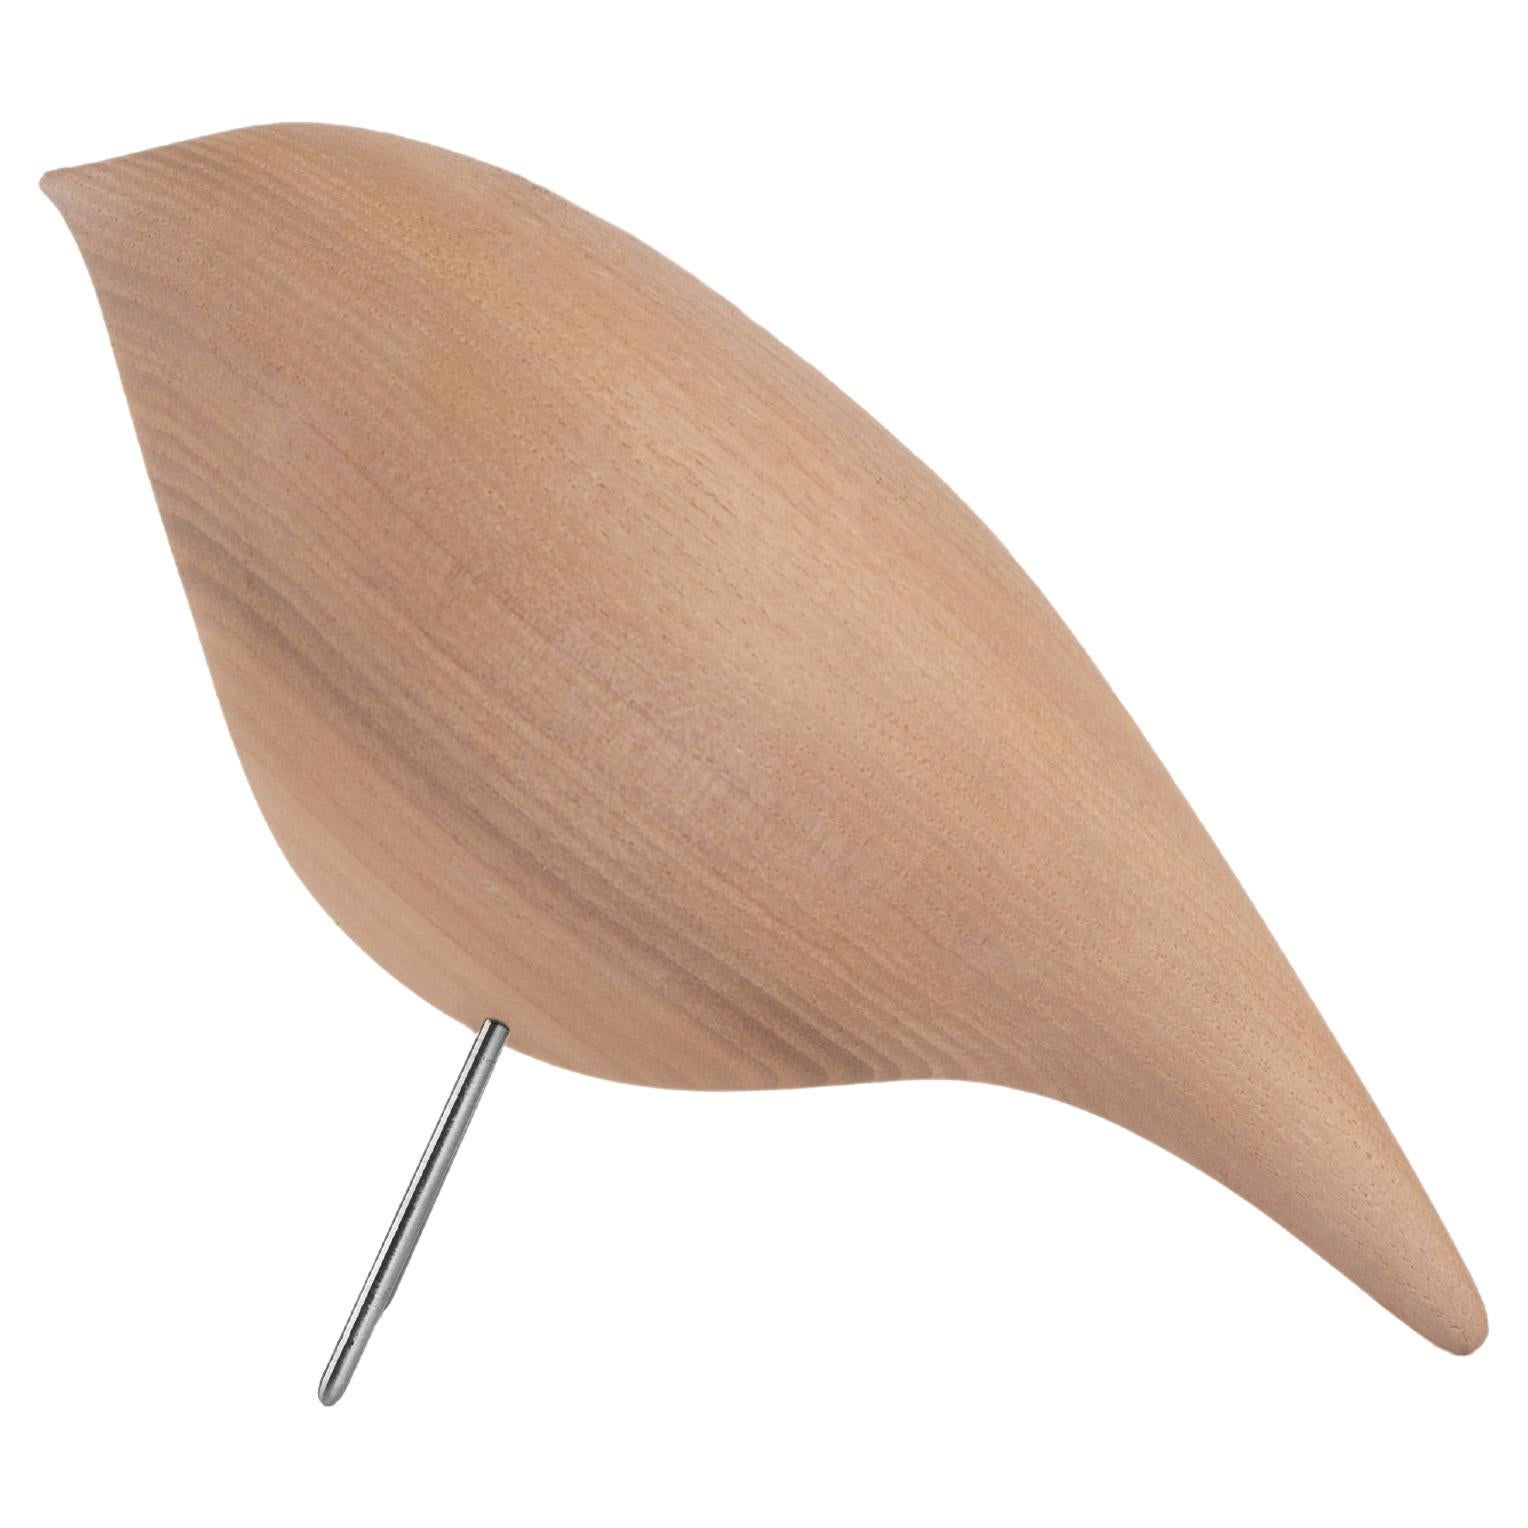 Handcrafted Tweety Decorative Bird CS1 by Noom in Natural Ashwood (in stock)